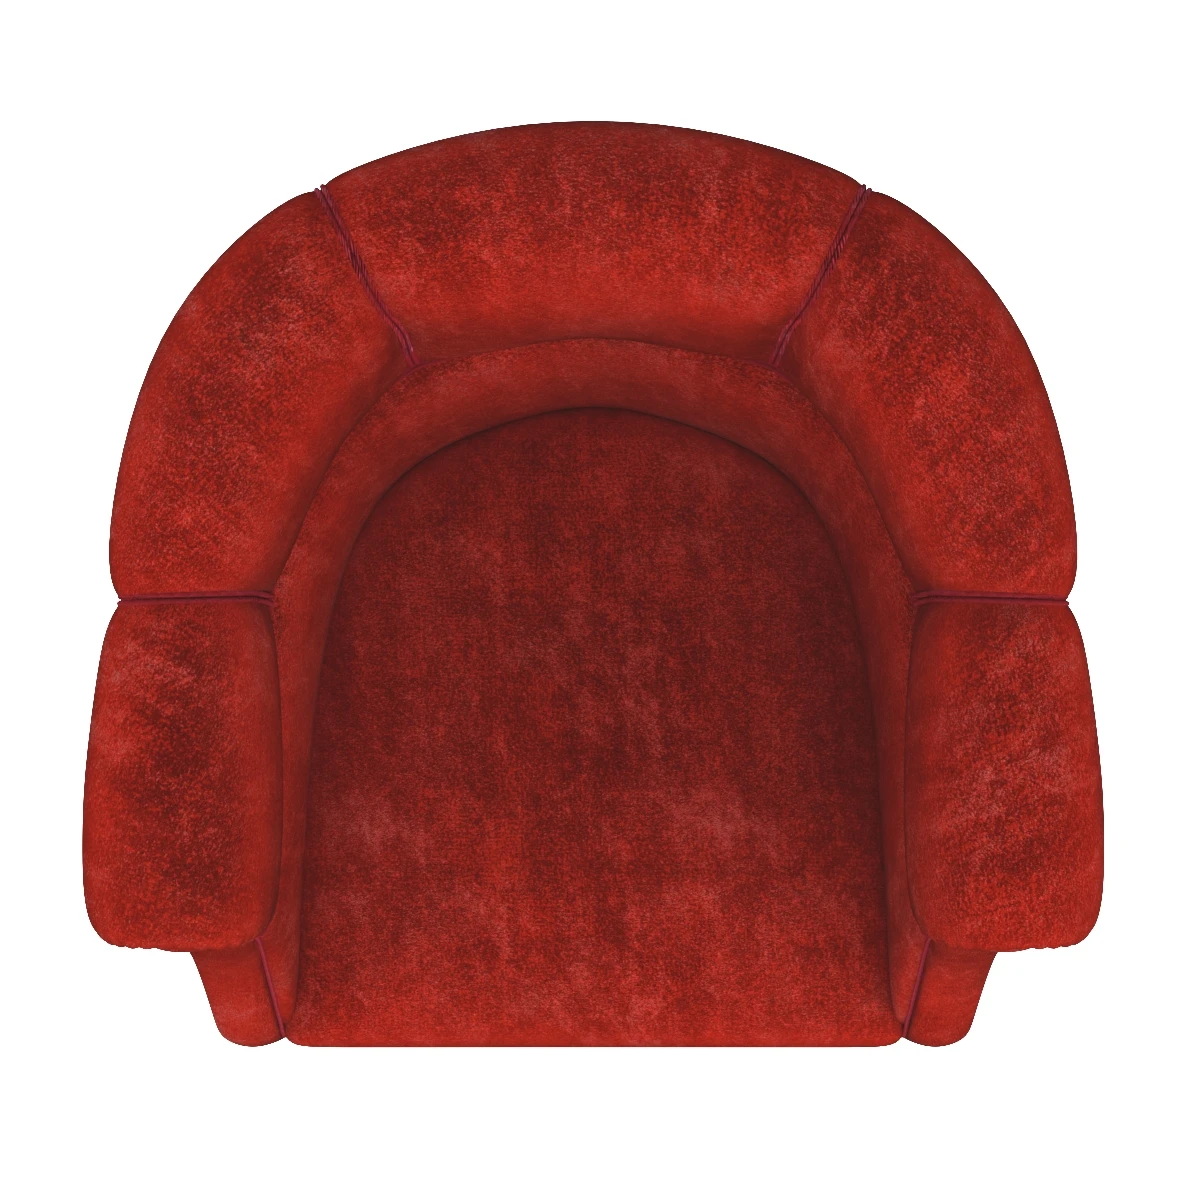 Danish Pair of 1940s Low Lounge Tub Chairs in Red Mohair 3D Model_03